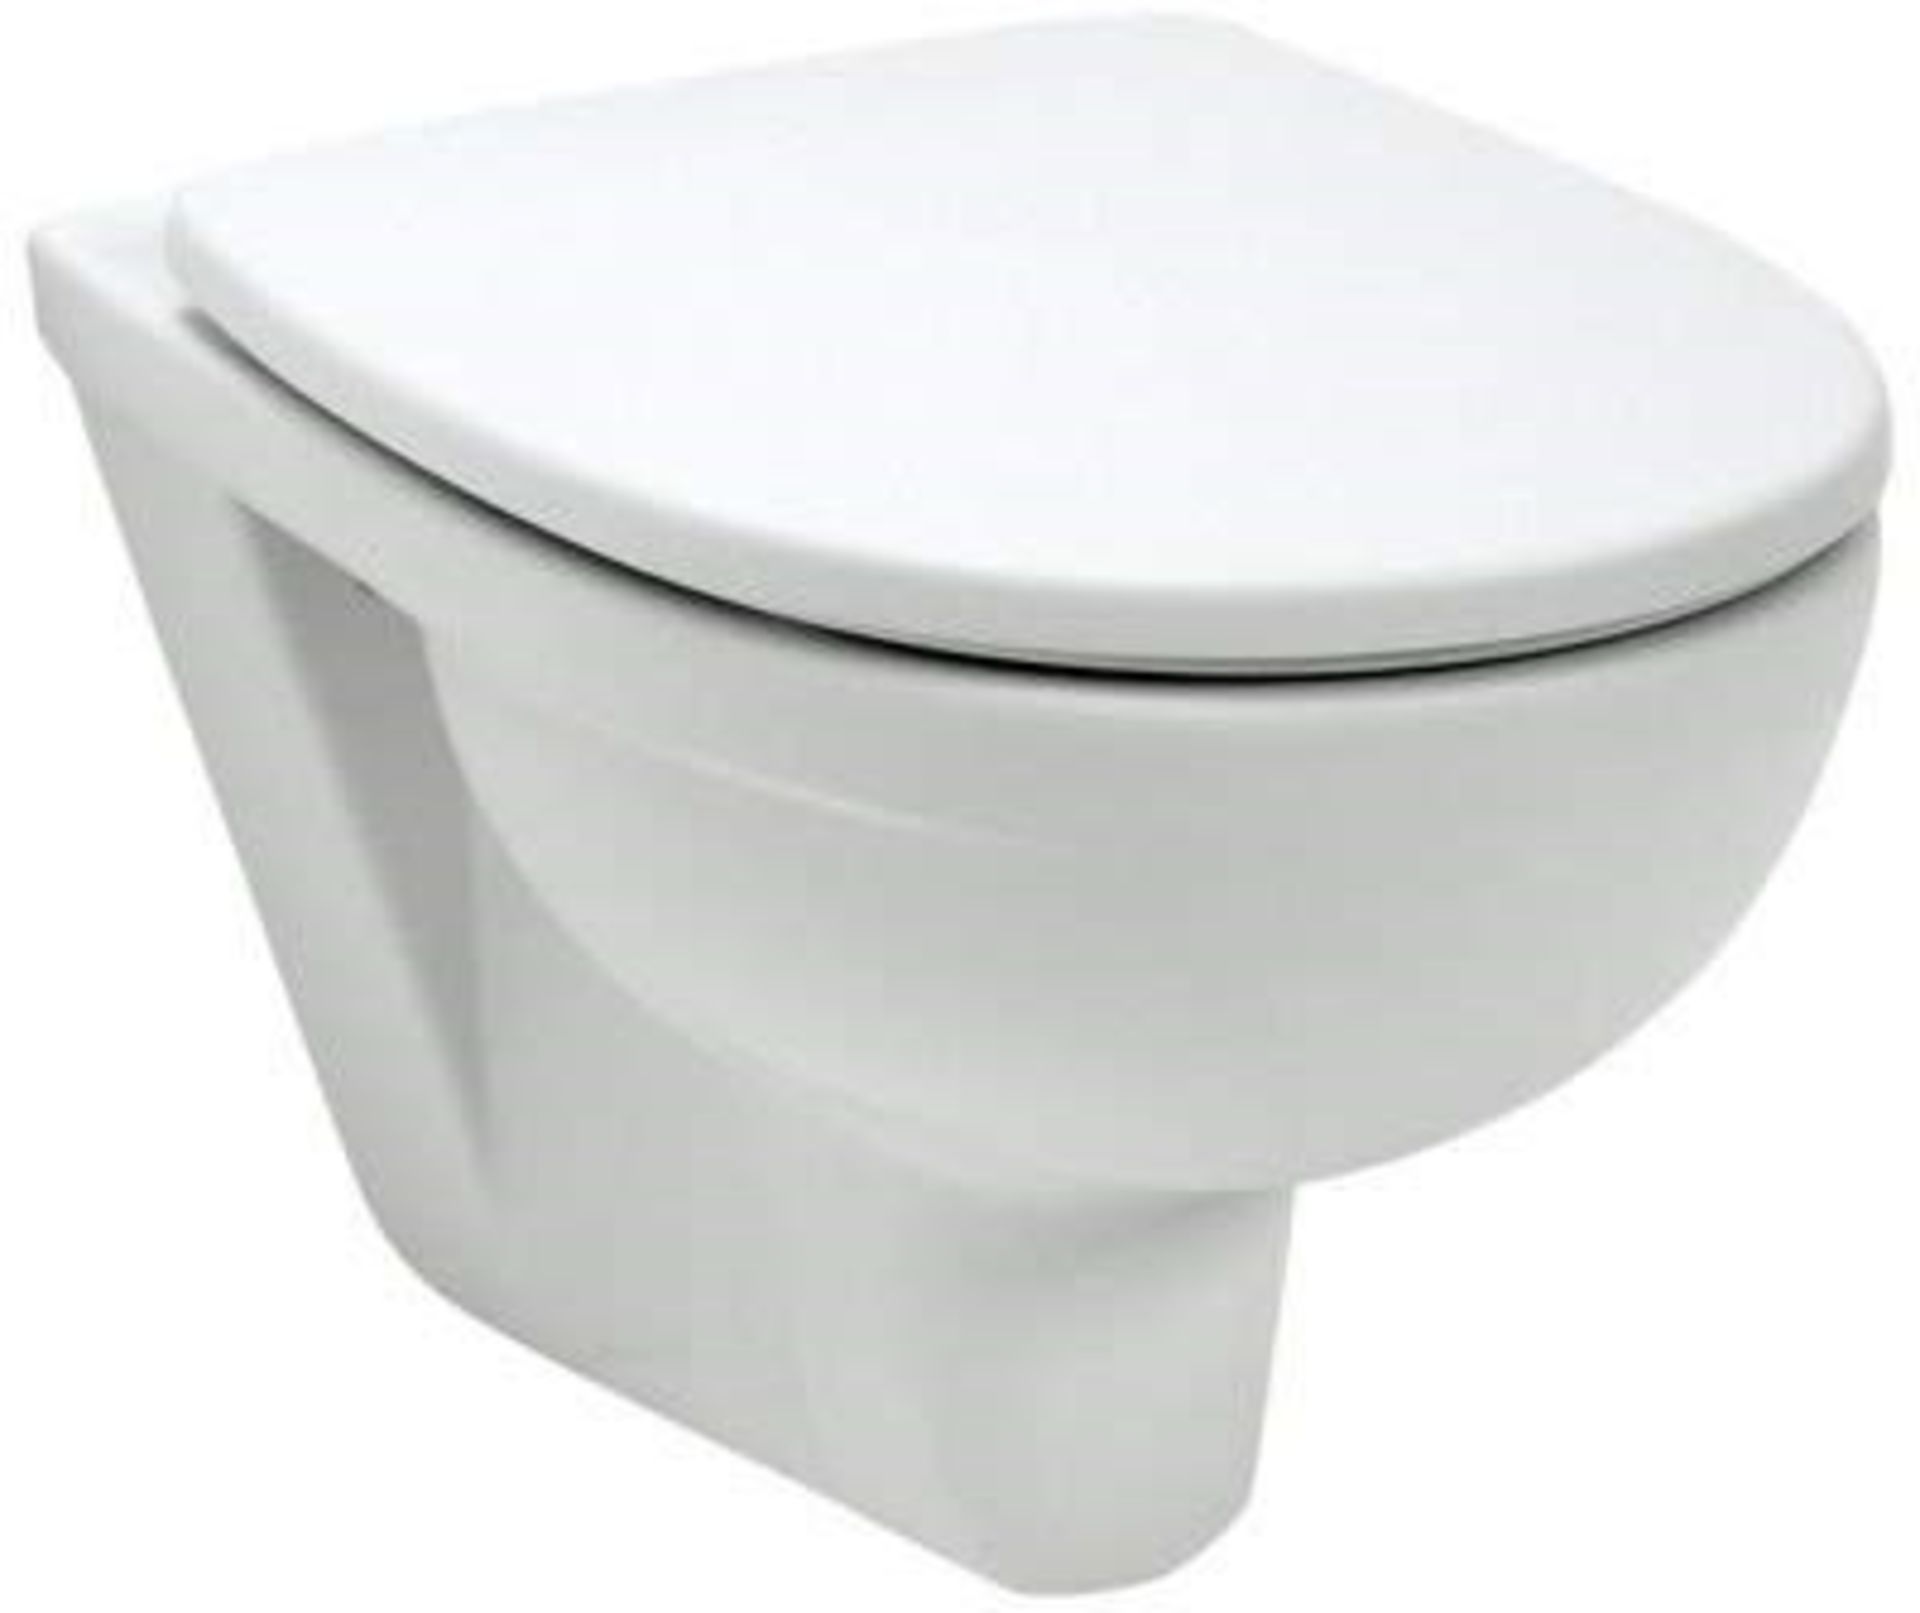 Twyford White Refresh Wall Hung WC Pan, Toilet.Seat not included.Twyford White Refresh Wall Hung - Image 2 of 2